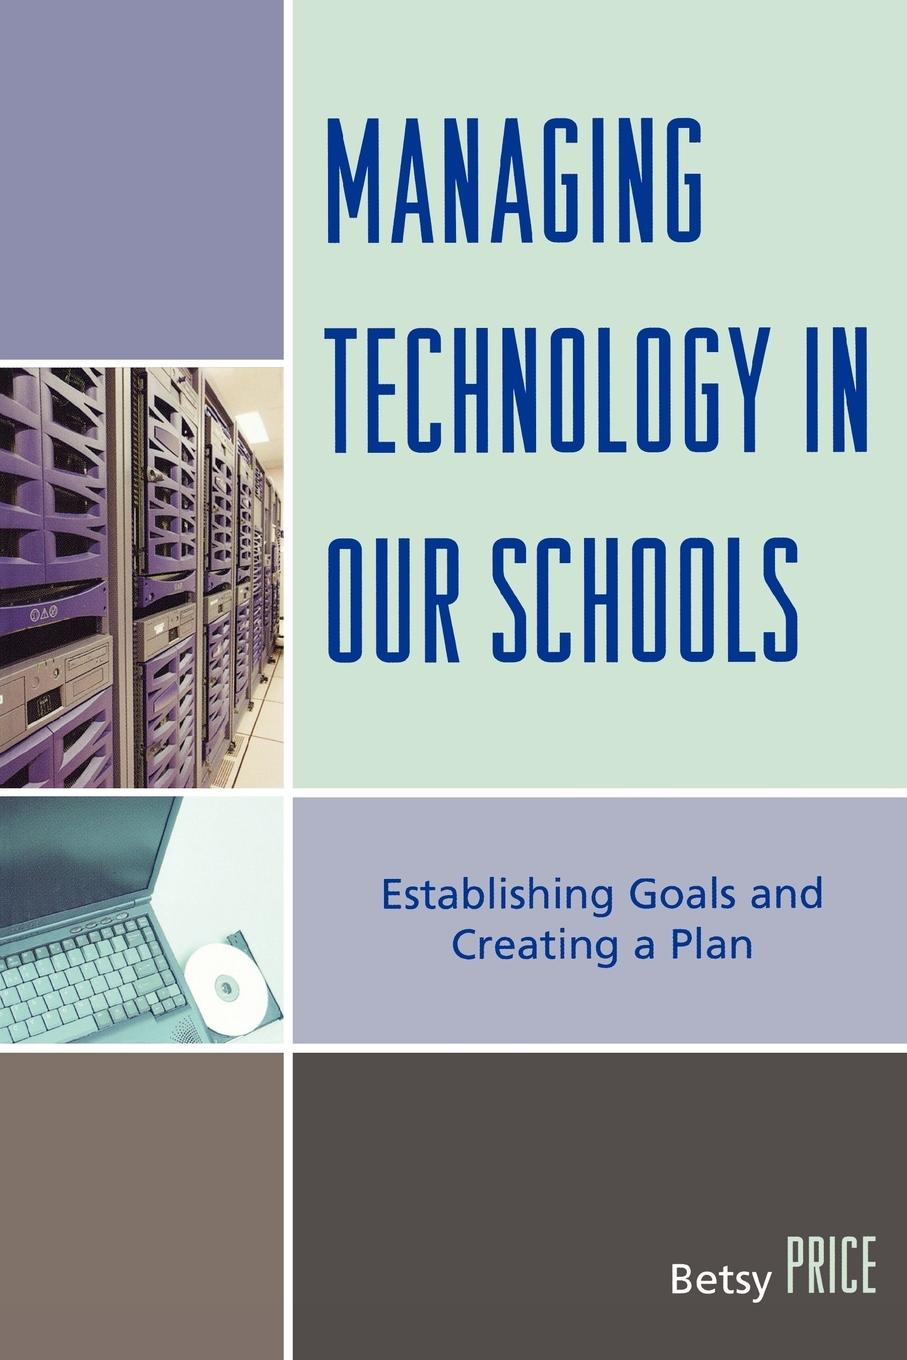 Managing Technology in Our Schools - Price, Betsy